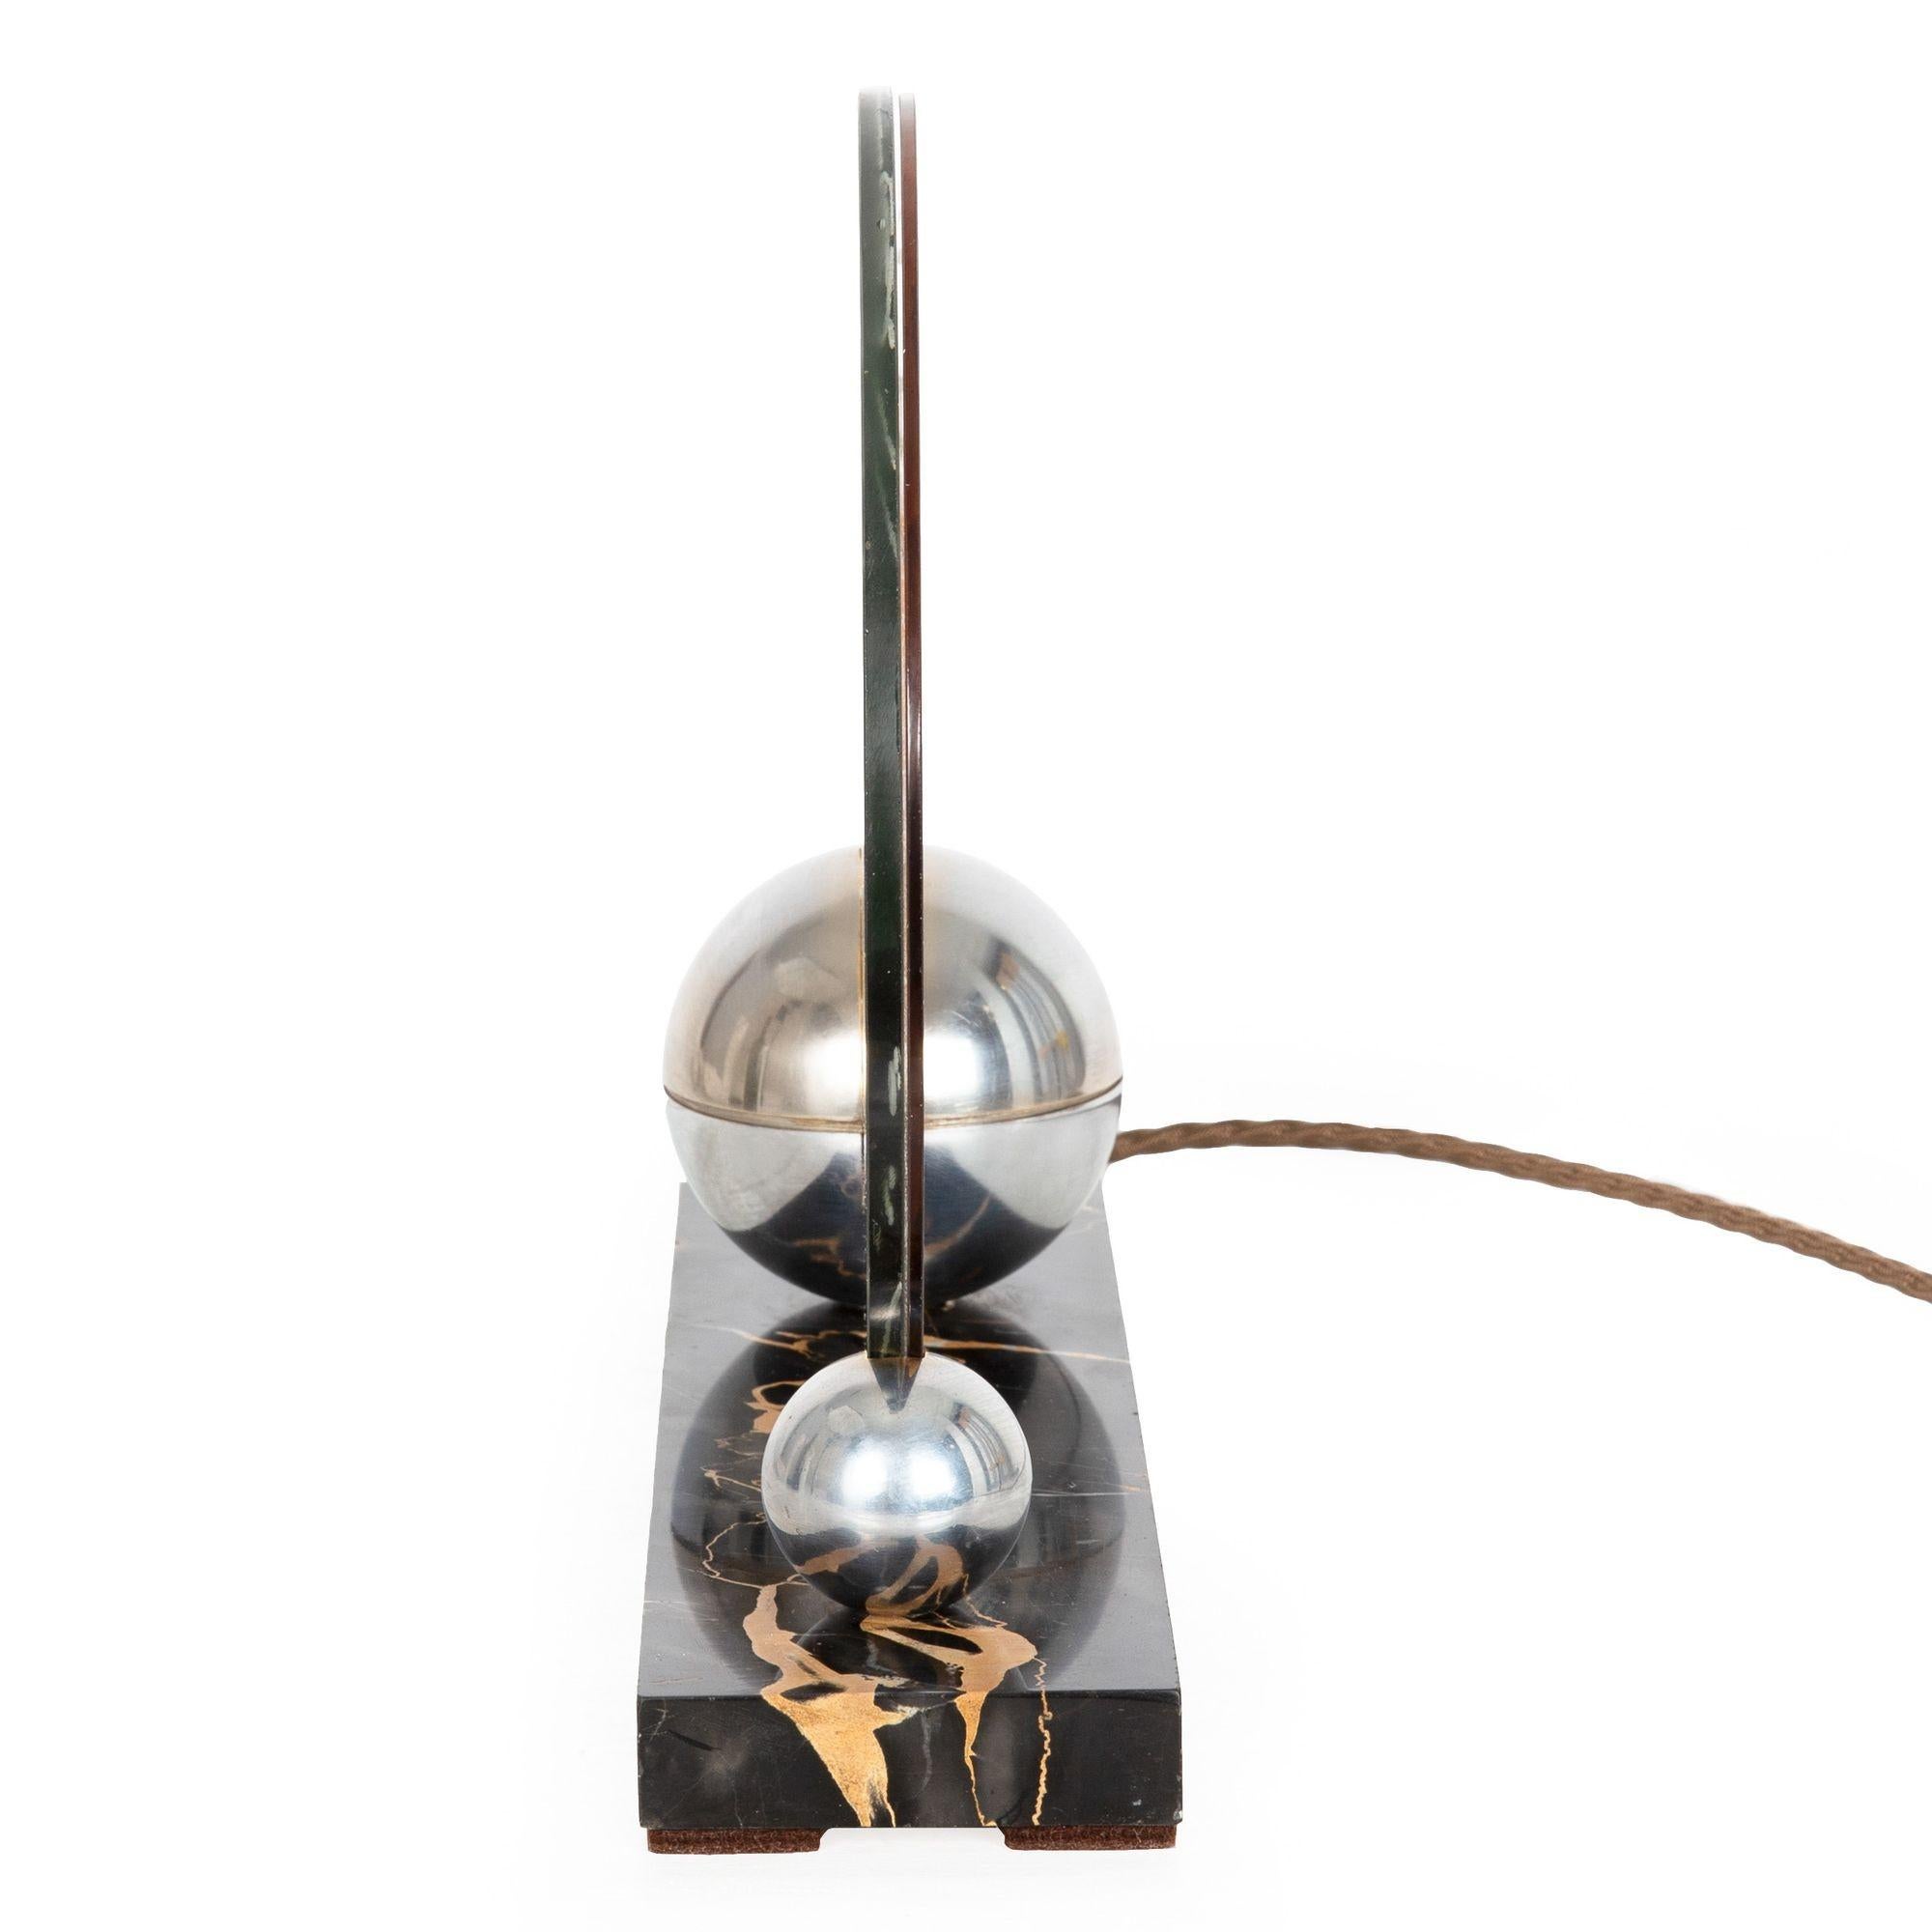 20th Century Art Deco Chrome, Marble, Glass “Fish” Lumiere Table Light Lamp ca. 1930s For Sale